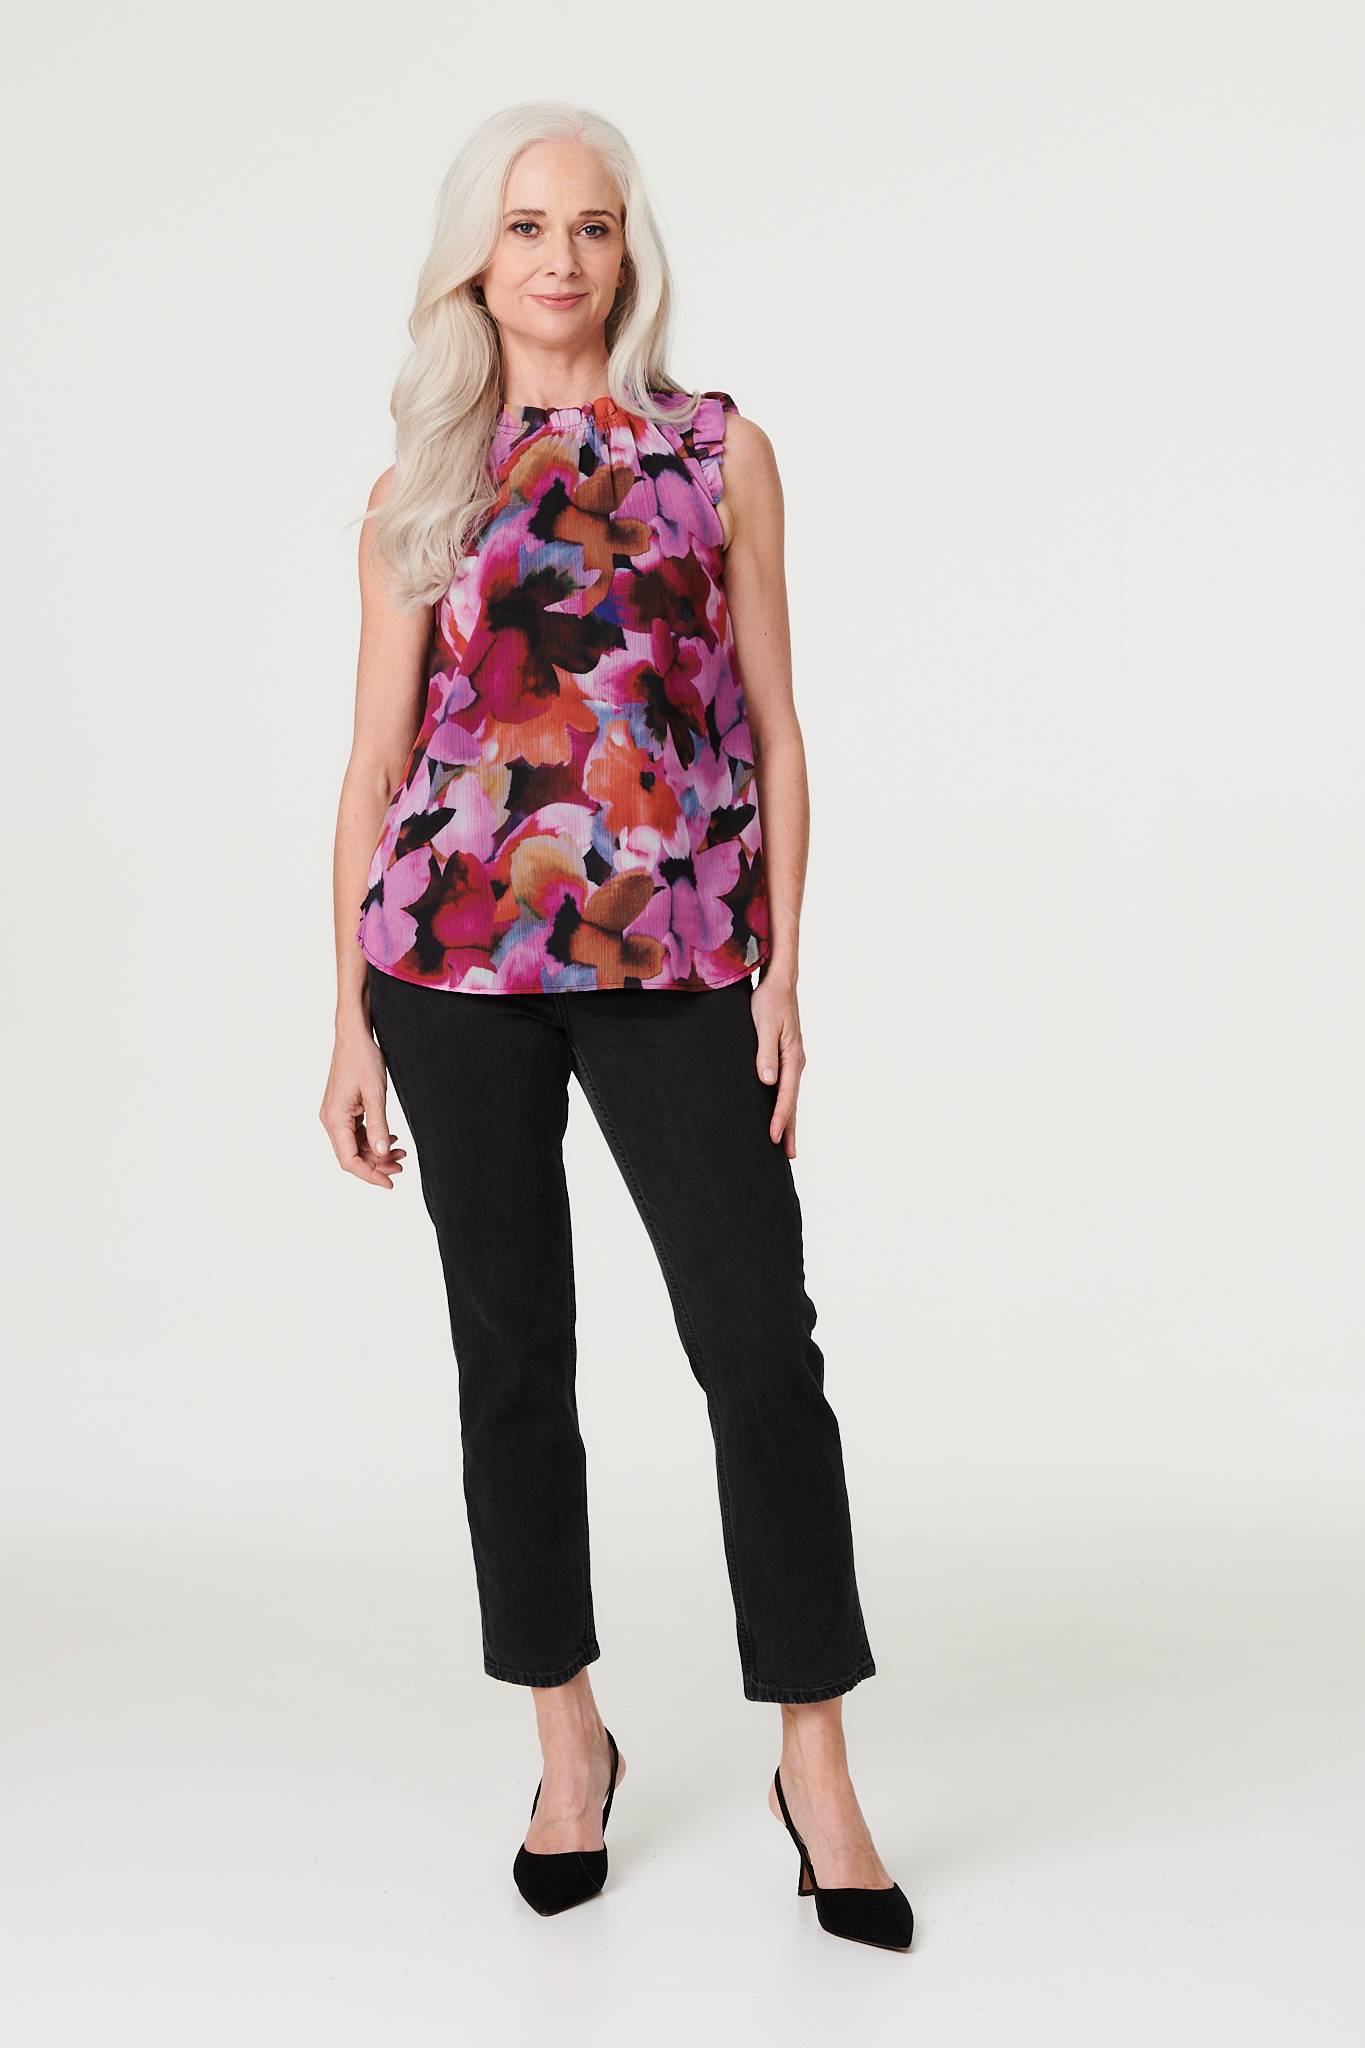 Pink | Floral Frill Detail Blouse Top : Model is 5'8.5"/174 cm and wears UK8/EU36/US4/AUS8